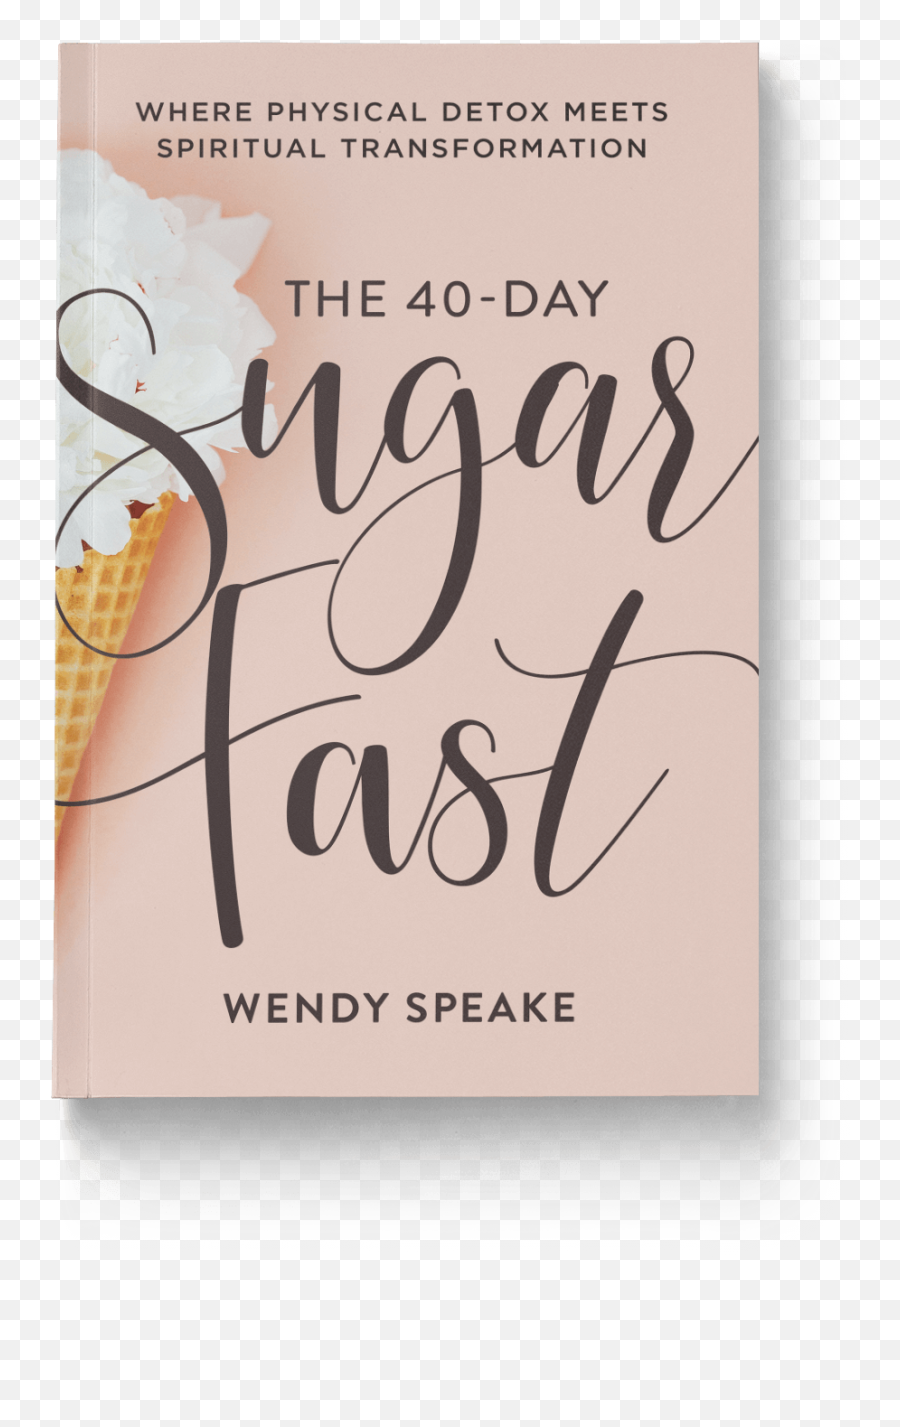 33 40 Day Sugar Fast Ideas 40 Day Fast Fast And Pray Day - Event Emoji,Whole30 Calendar Of Emotions